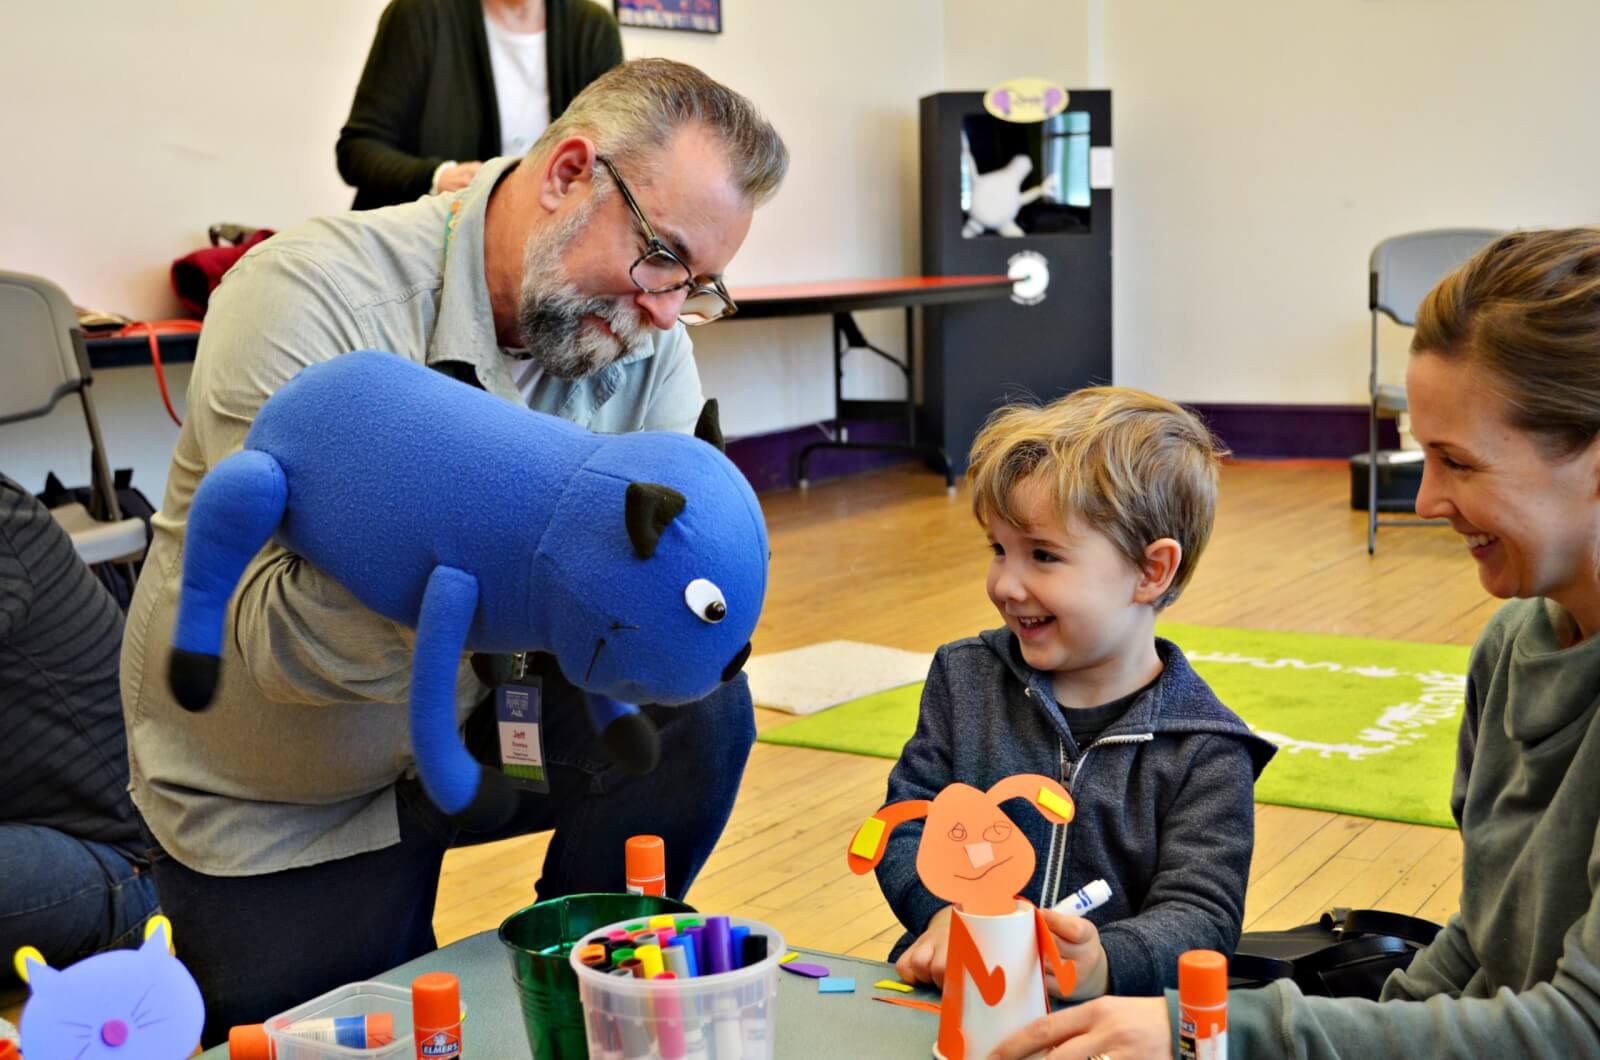 A puppeteer from the Center of Puppetry Arts, in Atlanta Georgia, shows a blue cat puppet to a smiling little boy and his caregiver during a workshop. 